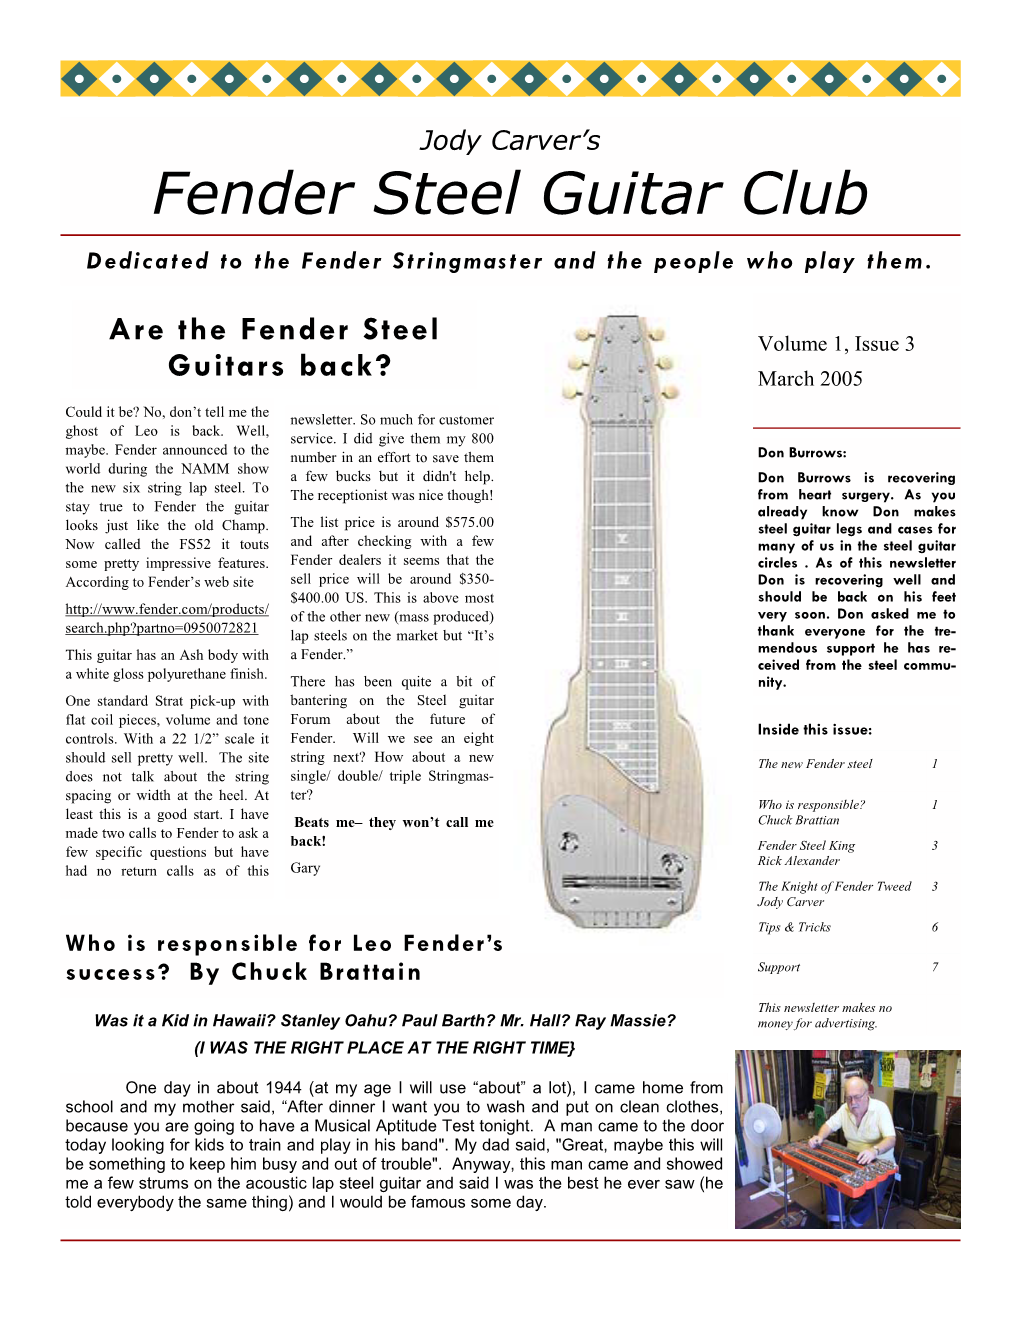 Fender Steel Guitar Club Dedicated to the Fender Stringmaster and the People Who Play Them